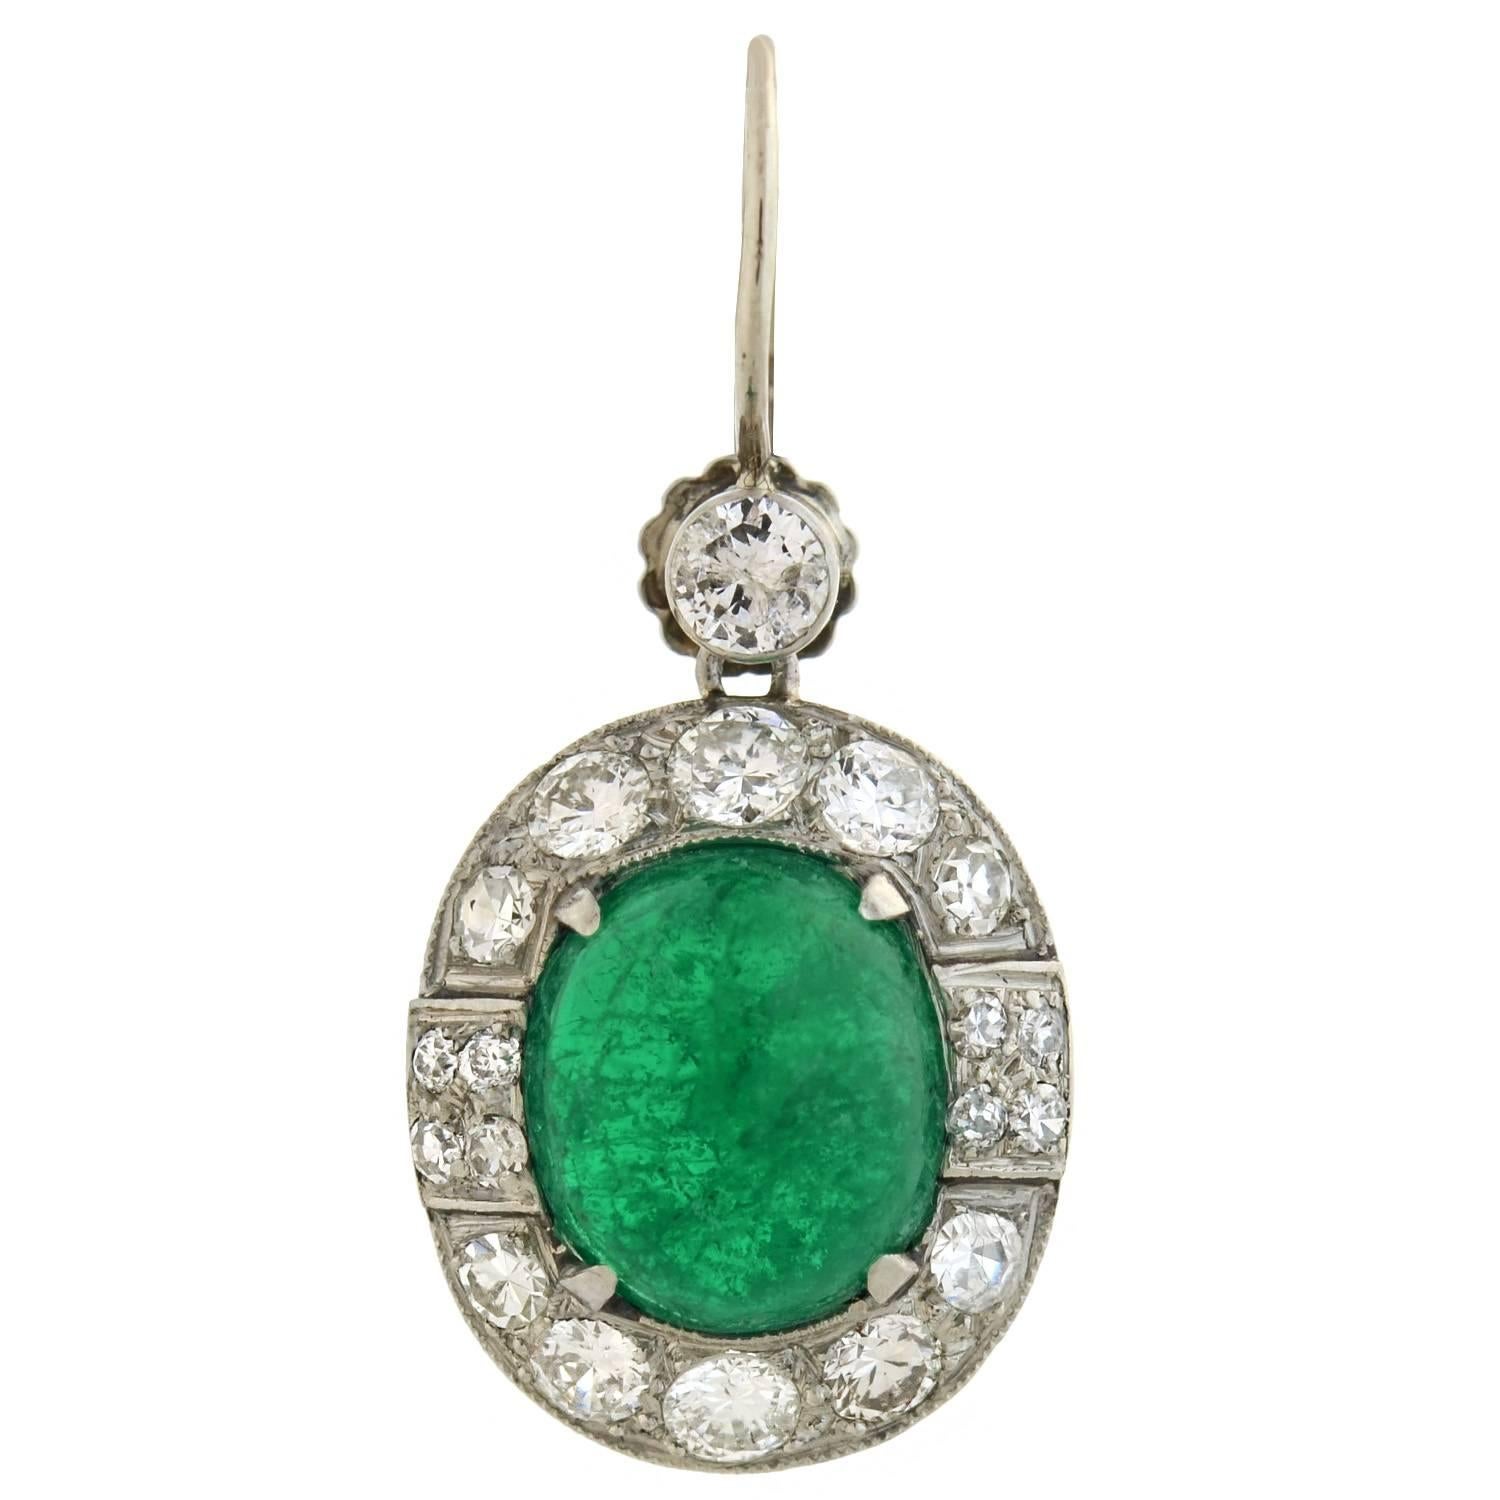 A spectacular pair of emerald and diamond earrings from the late Art Deco (ca1930s) era! These breathtaking earrings are crafted in 18kt white gold and hang from 14kt white gold wires. Each earring frames a luscious emerald cabochon at the center of